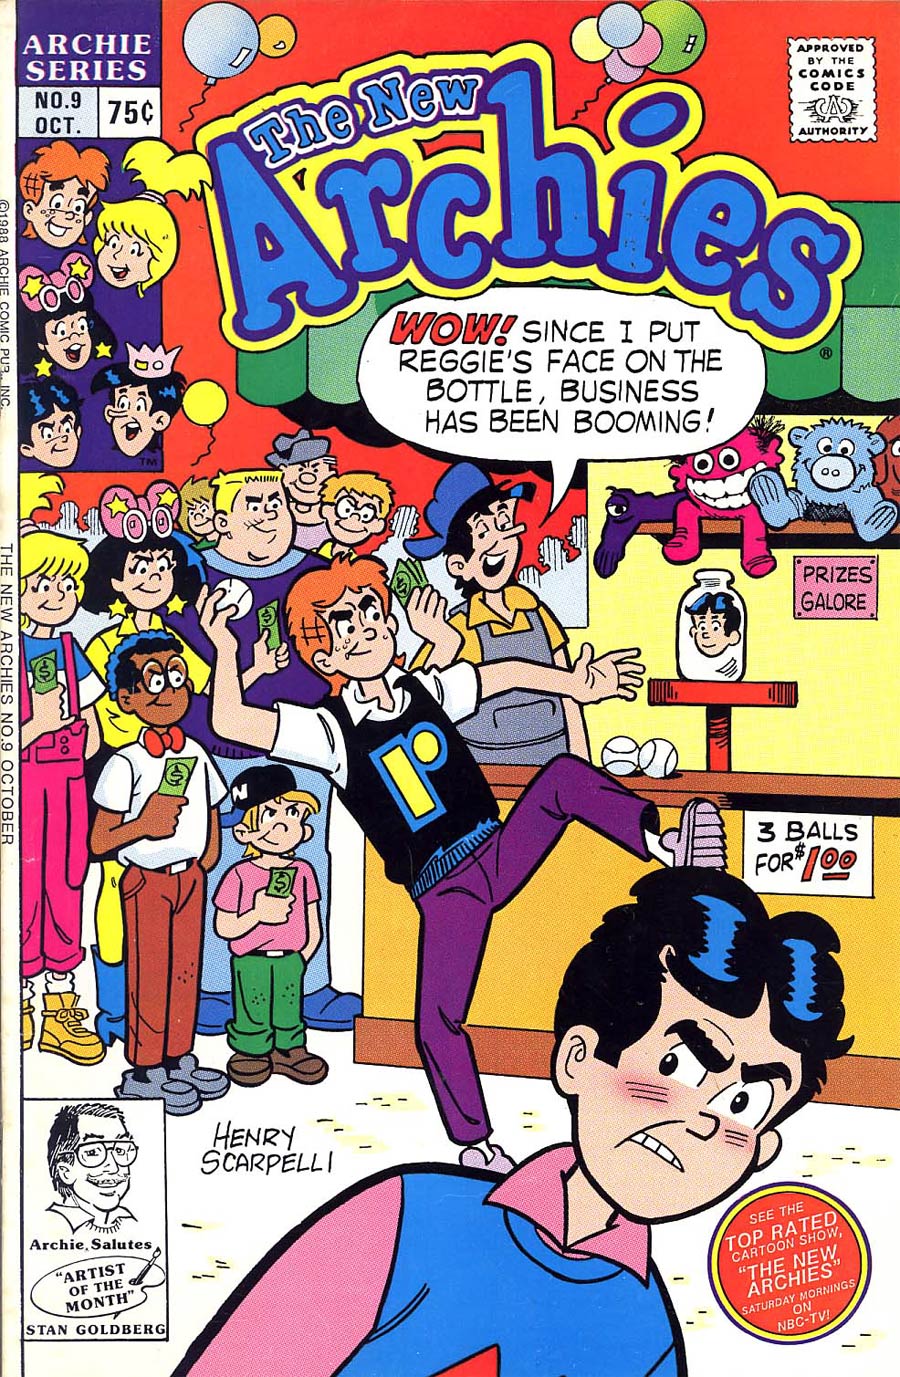 New Archies #9